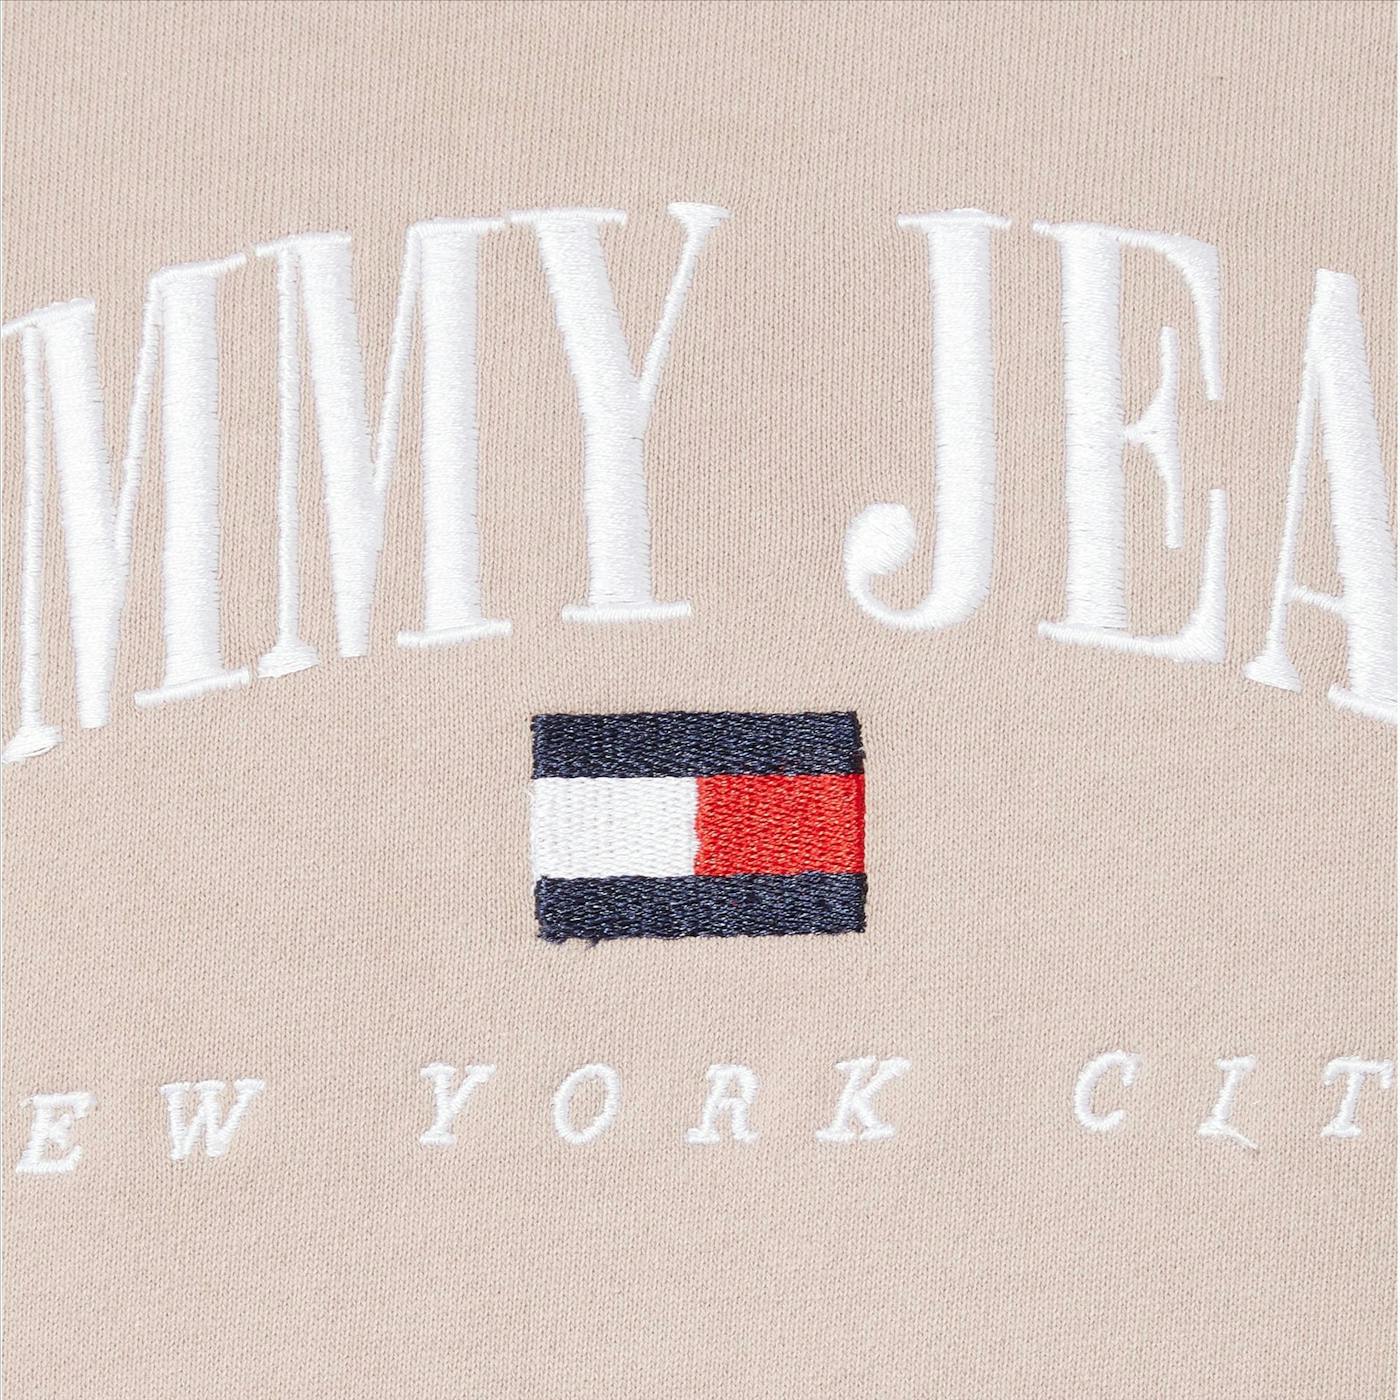 Tommy Jeans - Nude Varsity Crew sweater